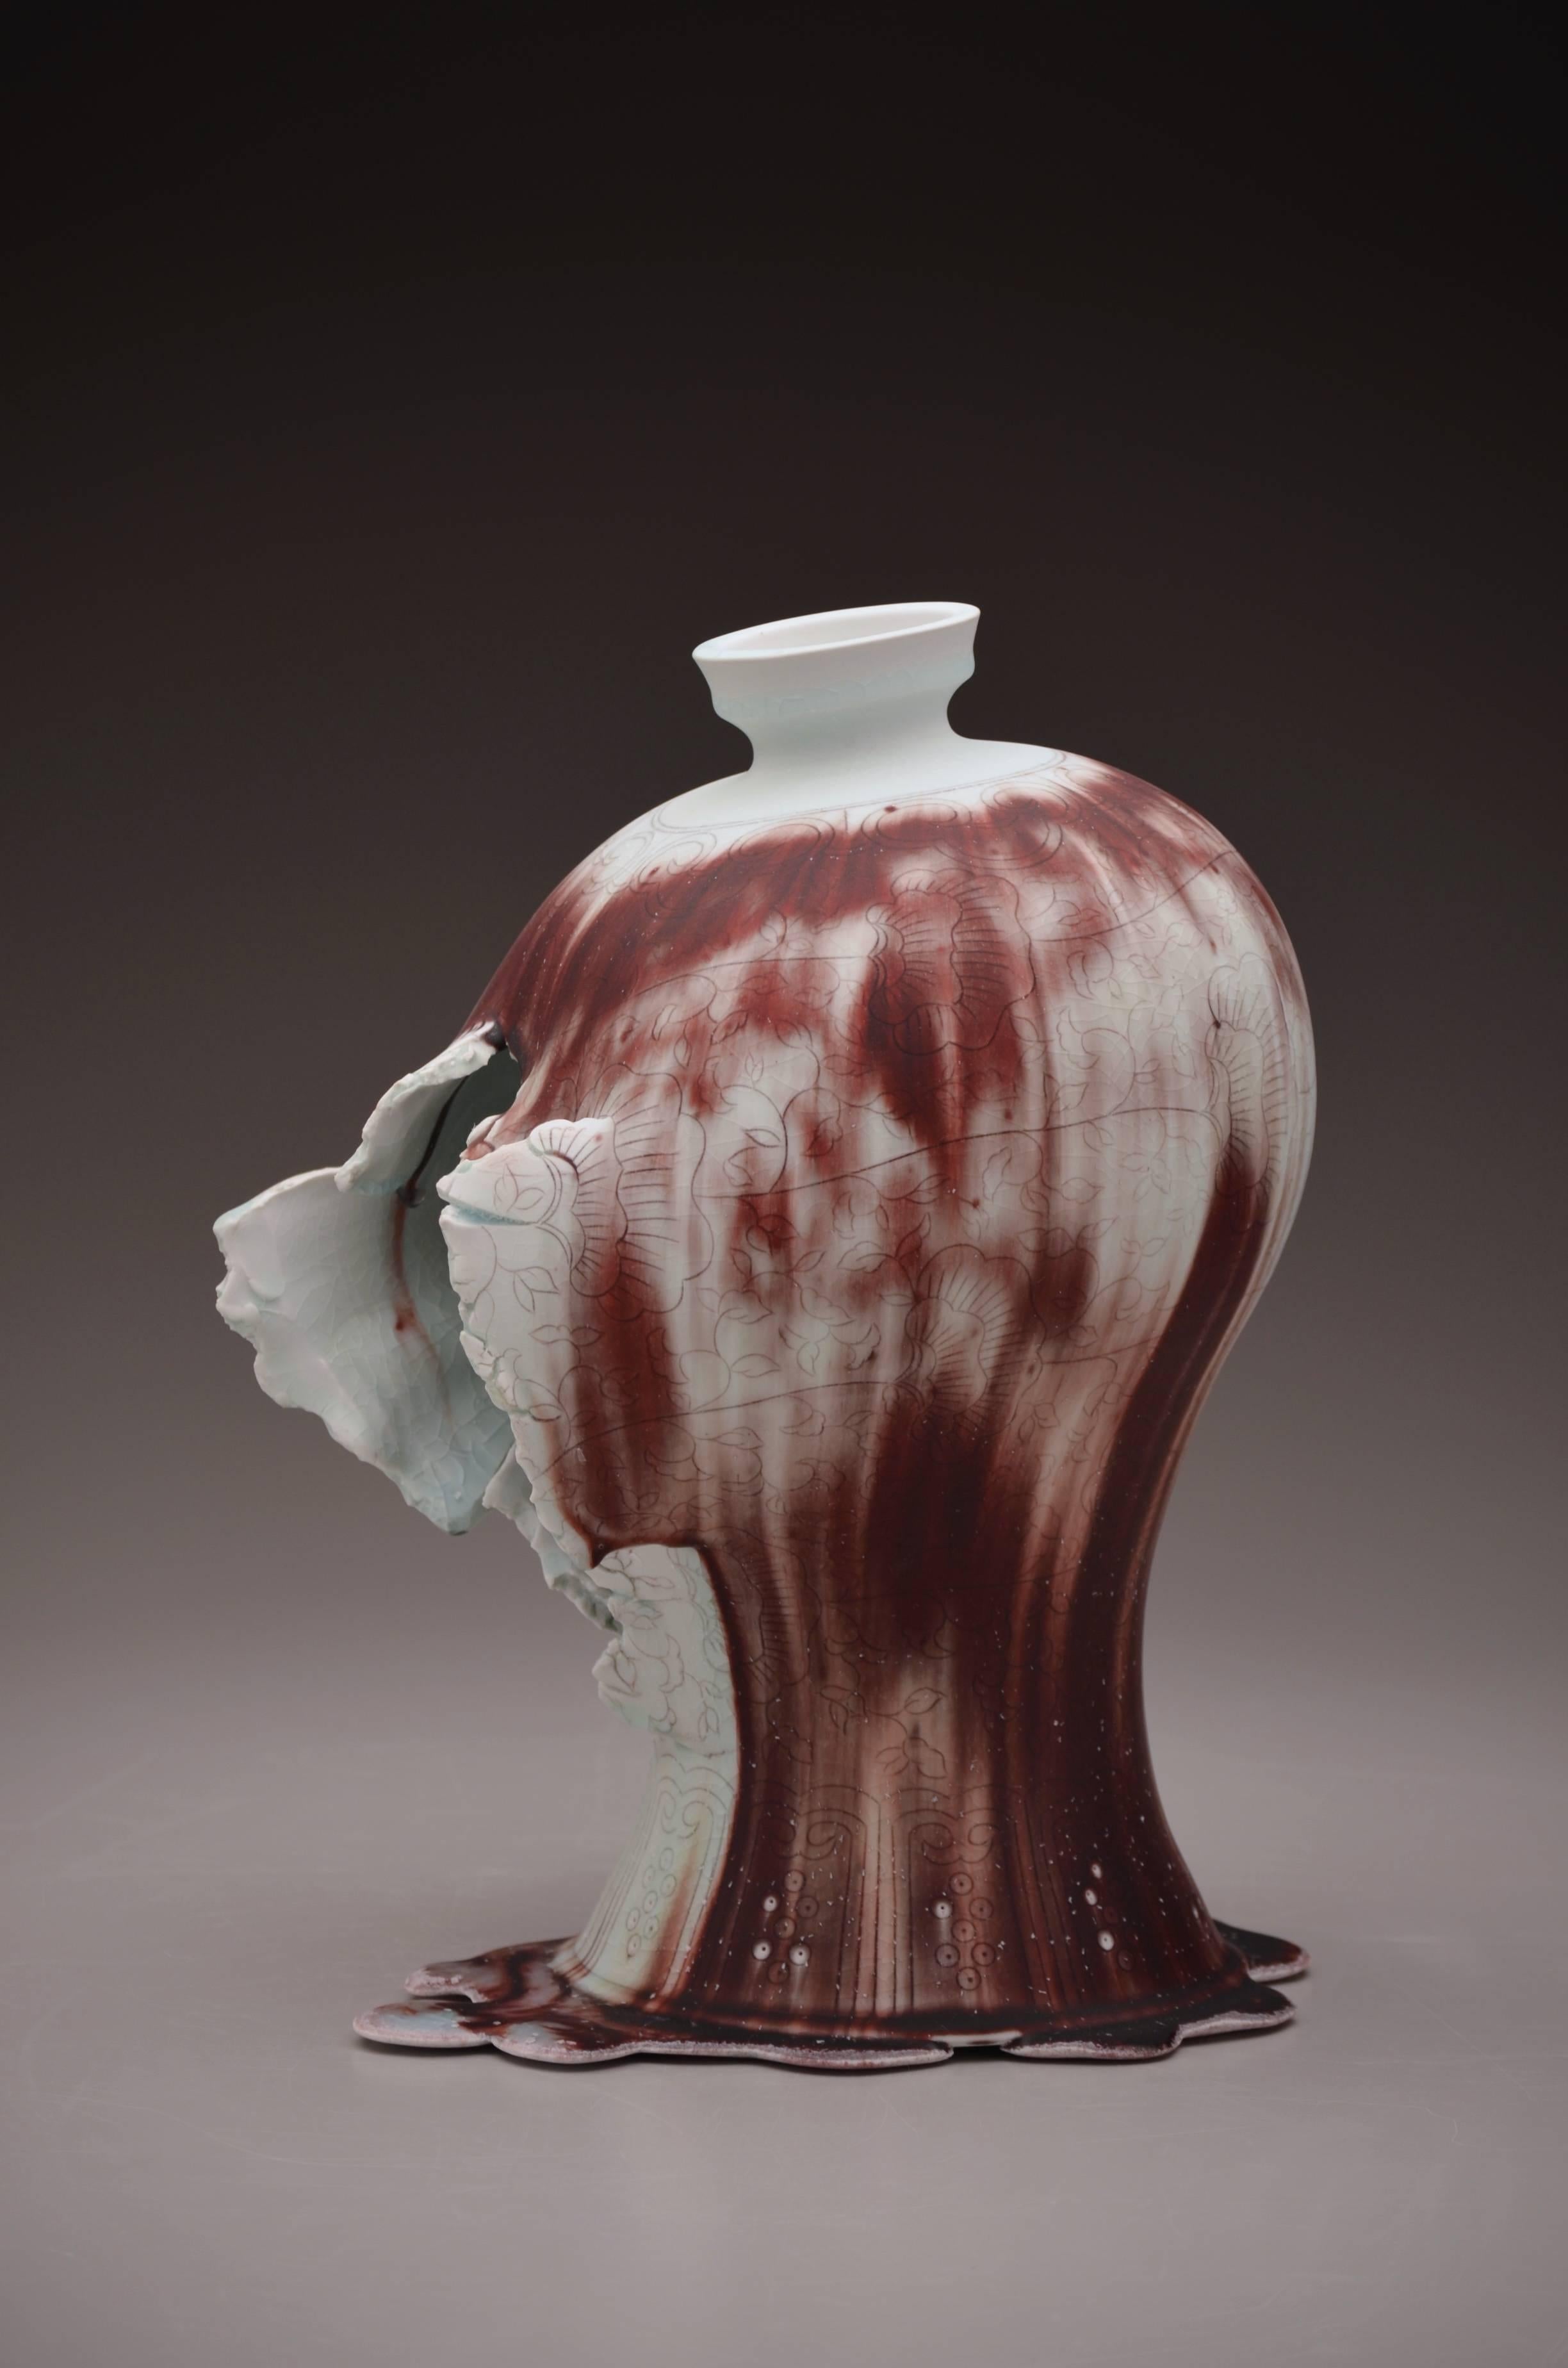 Dimensions: 15&quot; x 12&quot; x 19&quot;
Materials: Porcelain, Copper Inlay, Glaze

References to ancient Asian porcelain vase forms with occasional contemporary references abound in the drawing and form of Lee's work. Allowing the form,